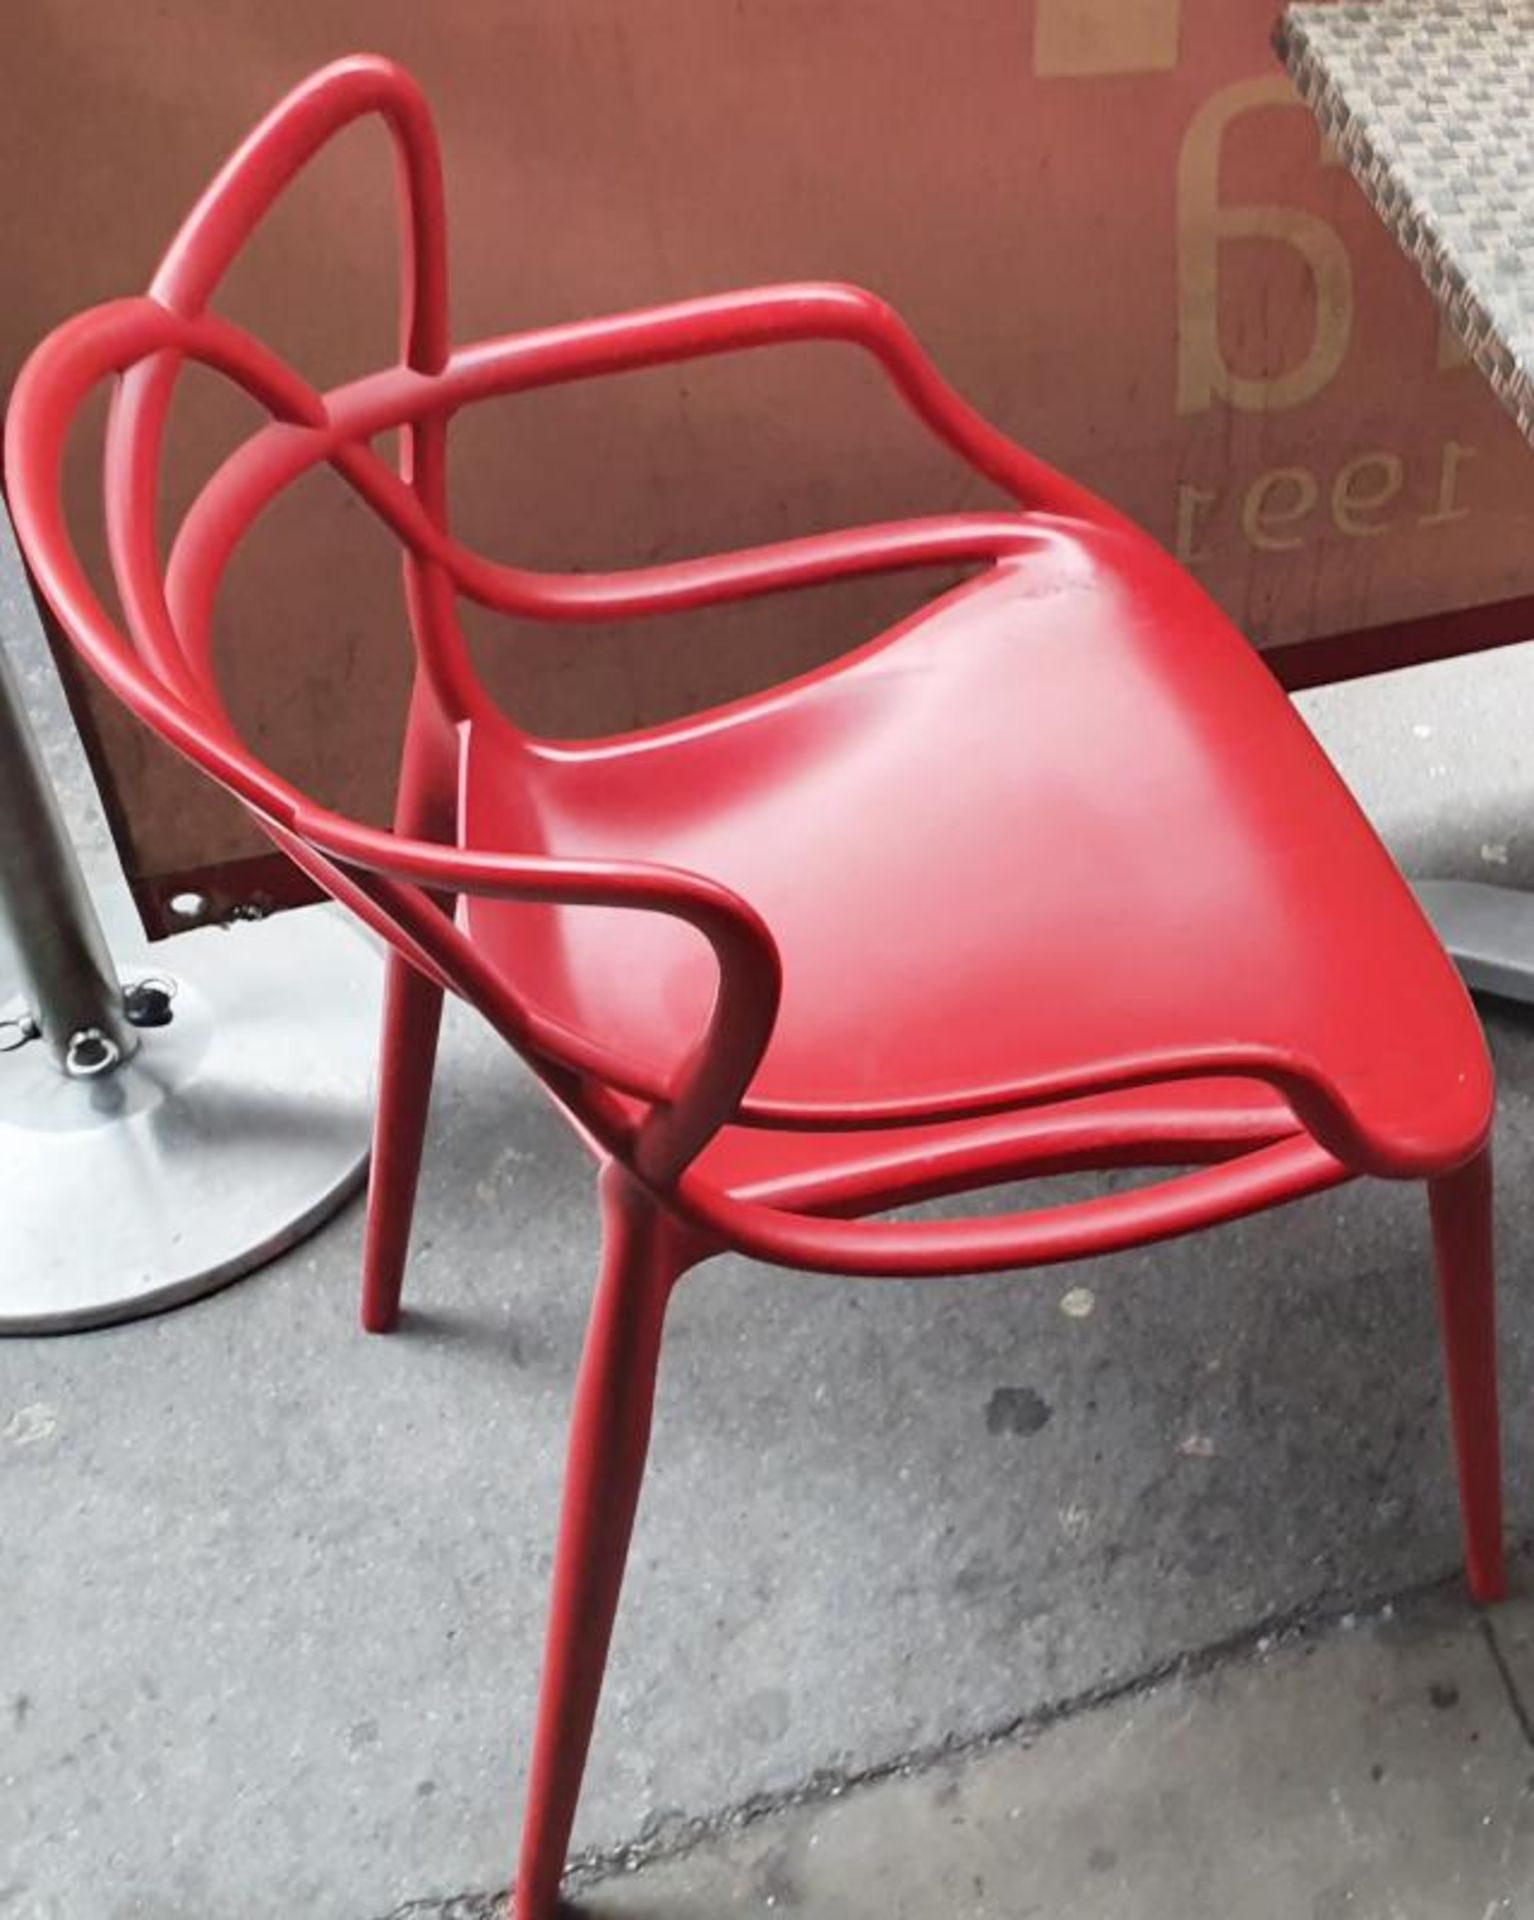 12 x Philippe Starck For Kartell 'Masters' Designer Bistro Chairs - Includes 10 x Red And 2 x Black - Image 6 of 6